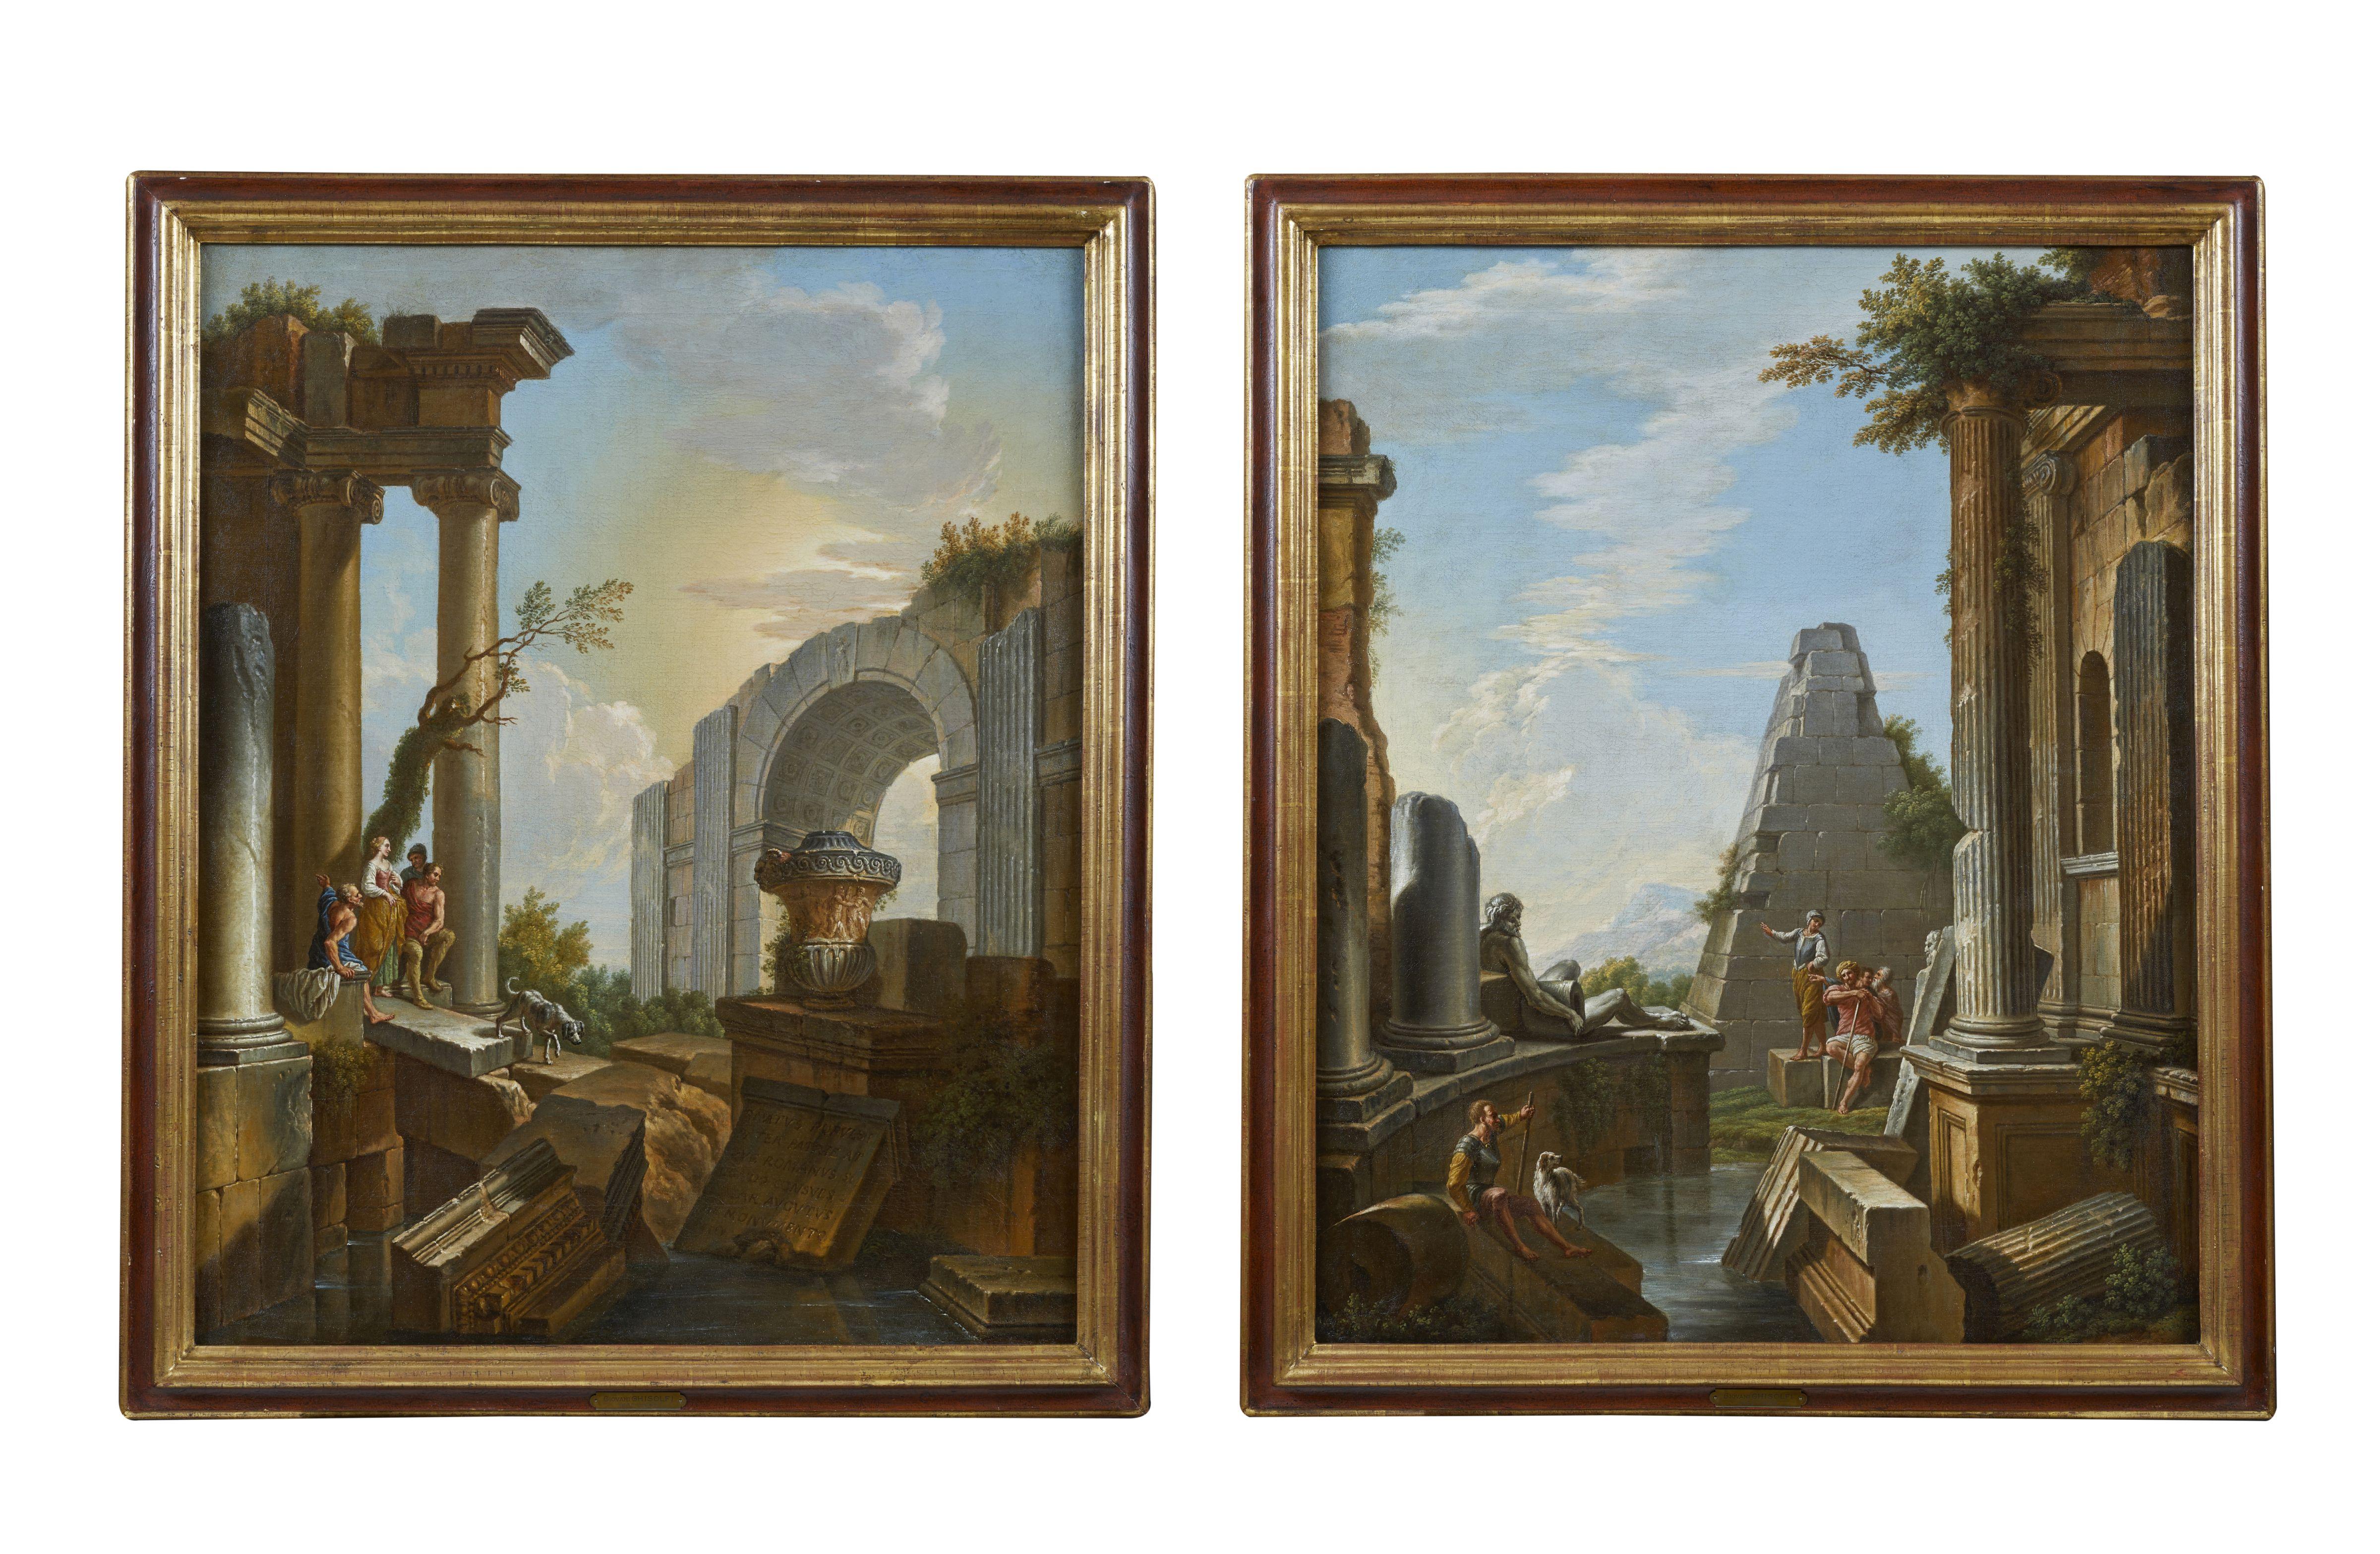 These two valuable works , which stand out for their fine execution quality, as well as for their excellent state of preservation, testify to the heights that Giovanni Ghisolfi, one of the most important and influential ruin painters of the 17th